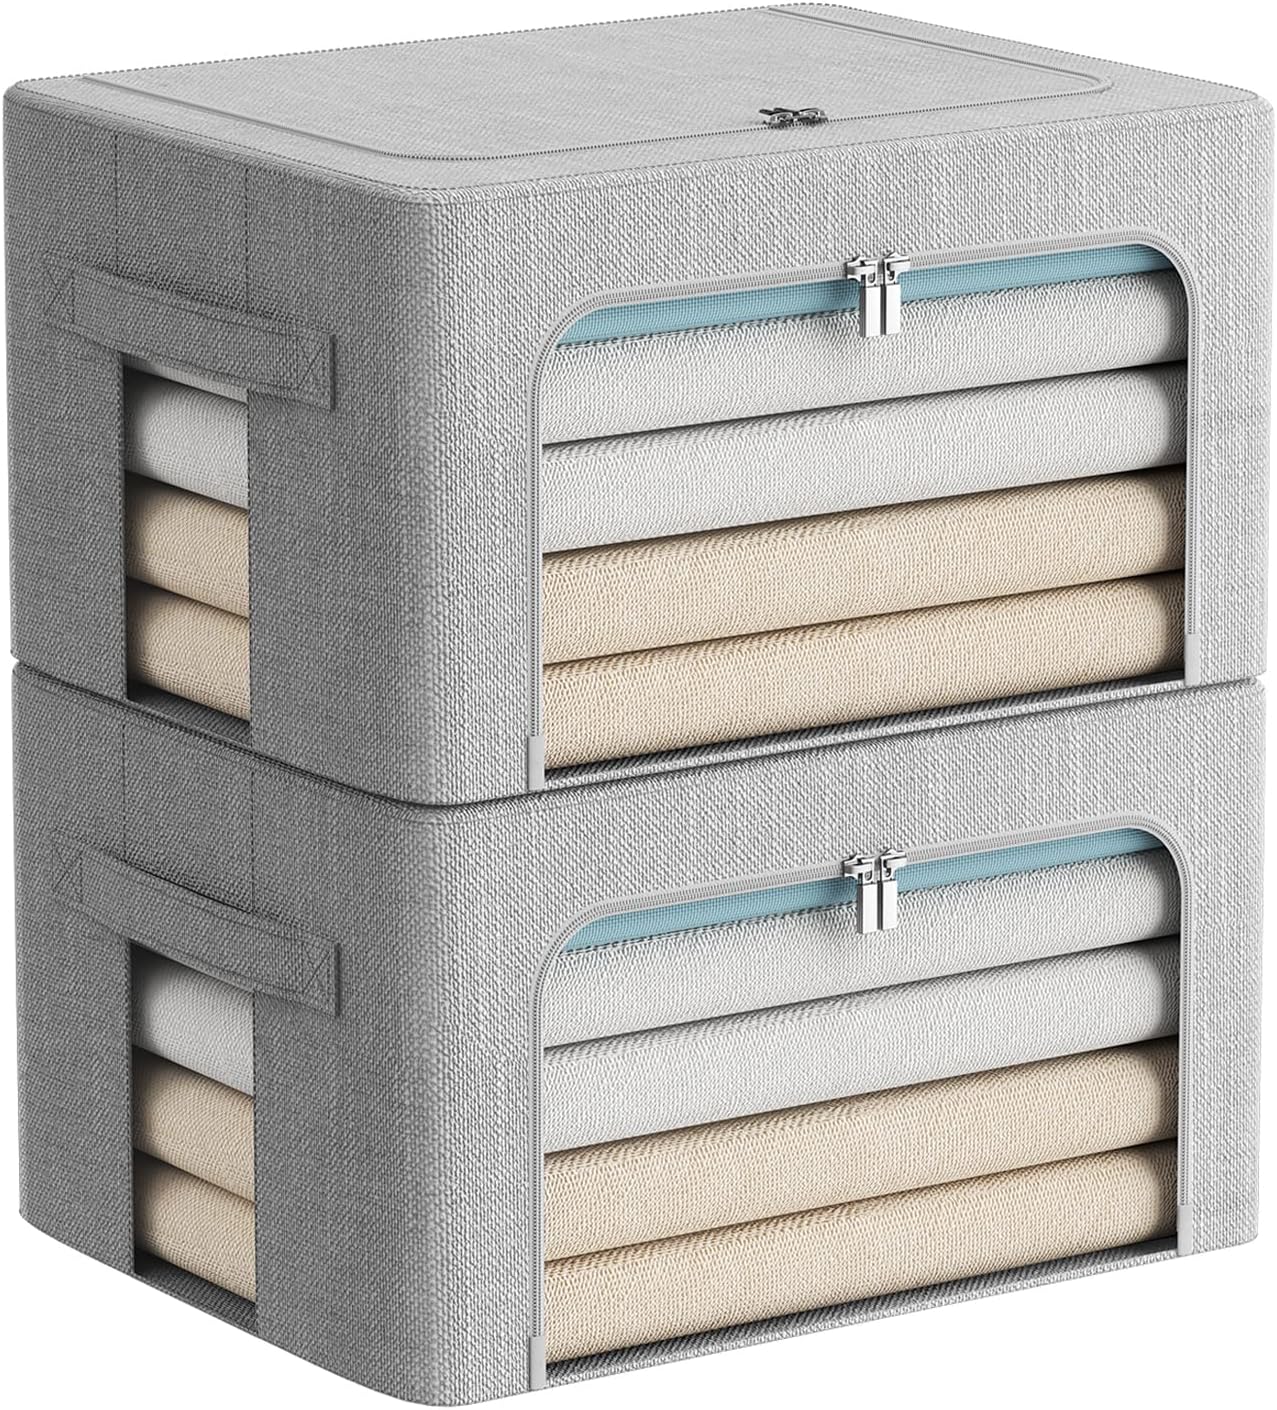 2 Pack Clothes Storage Bins - Stackable Metal Frame Storage Box Foldable Linen Fabric Organizer with Carrying Handles and Clear Window-22L (Light Gray, 15.7X 11.8X 7.8Inch)